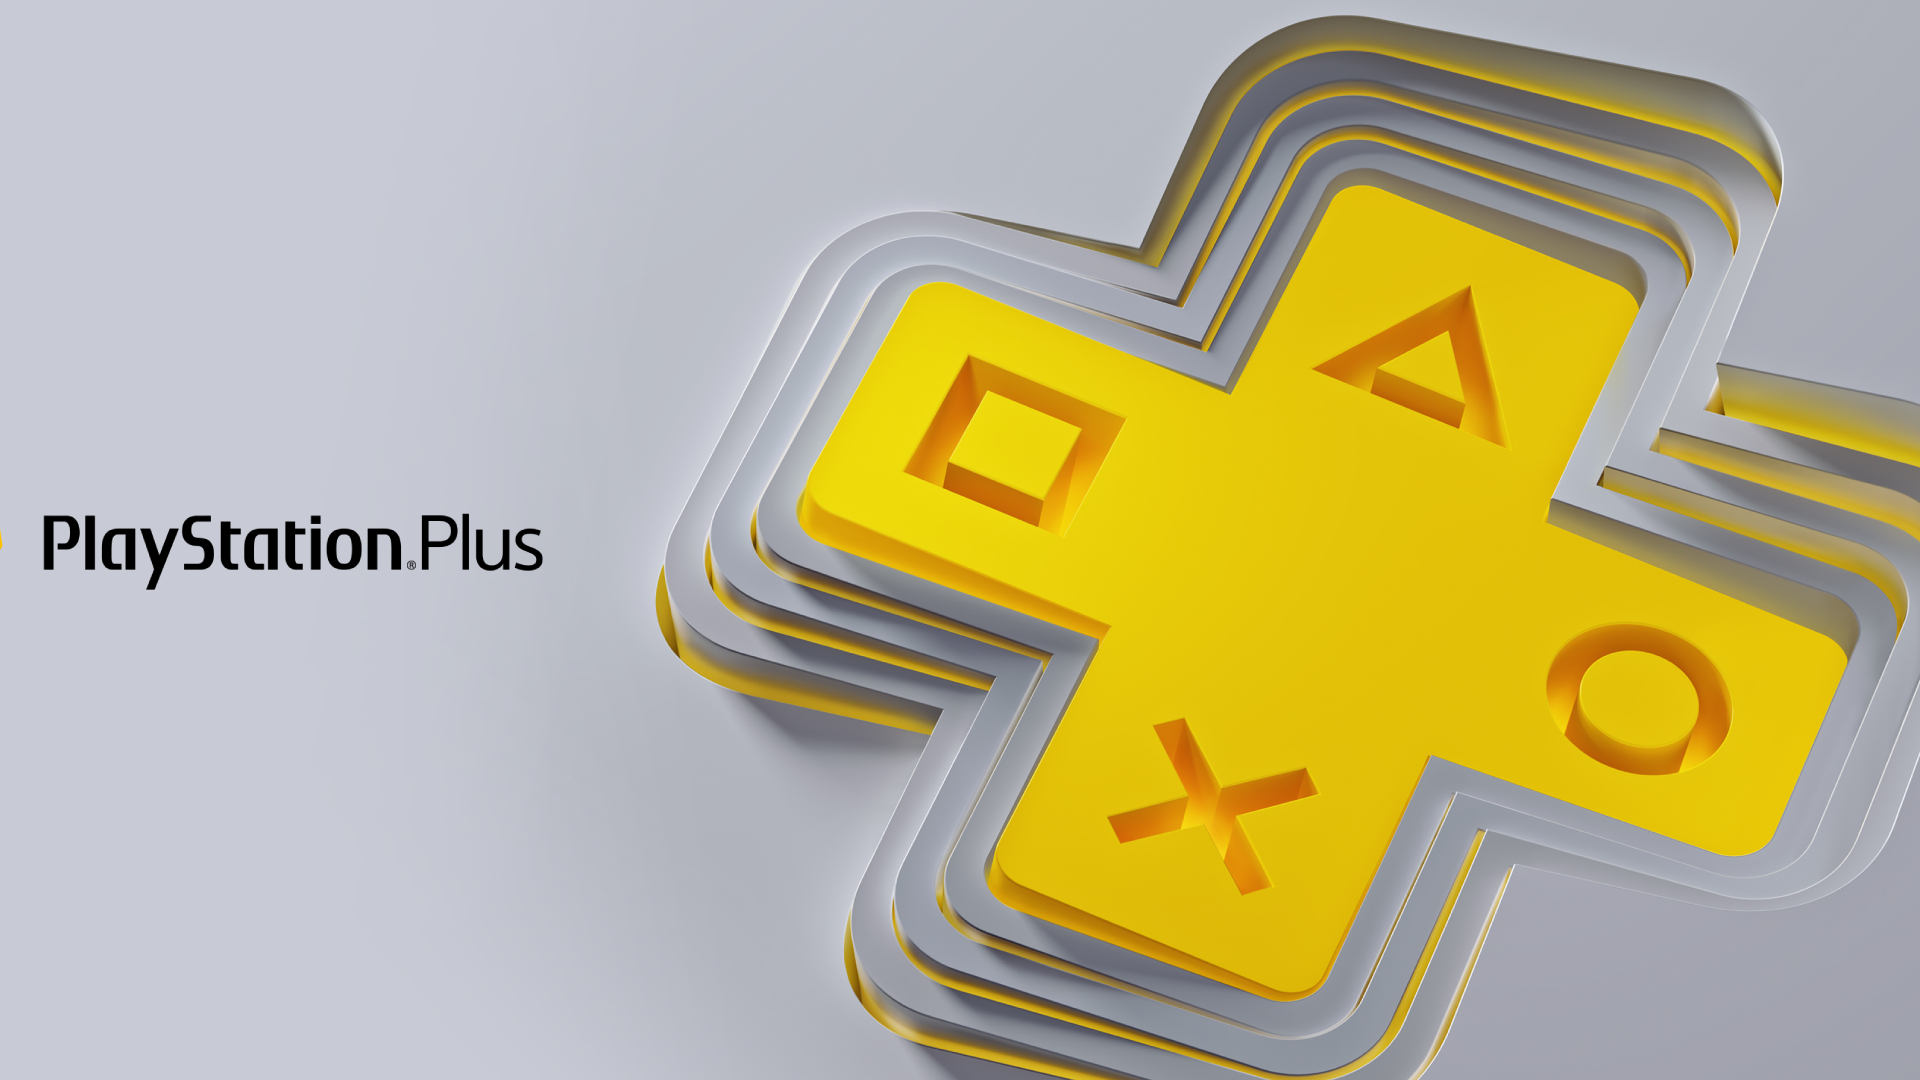 PlayStation Plus Premium Shows How Hard It Is To Compete With Game Pass